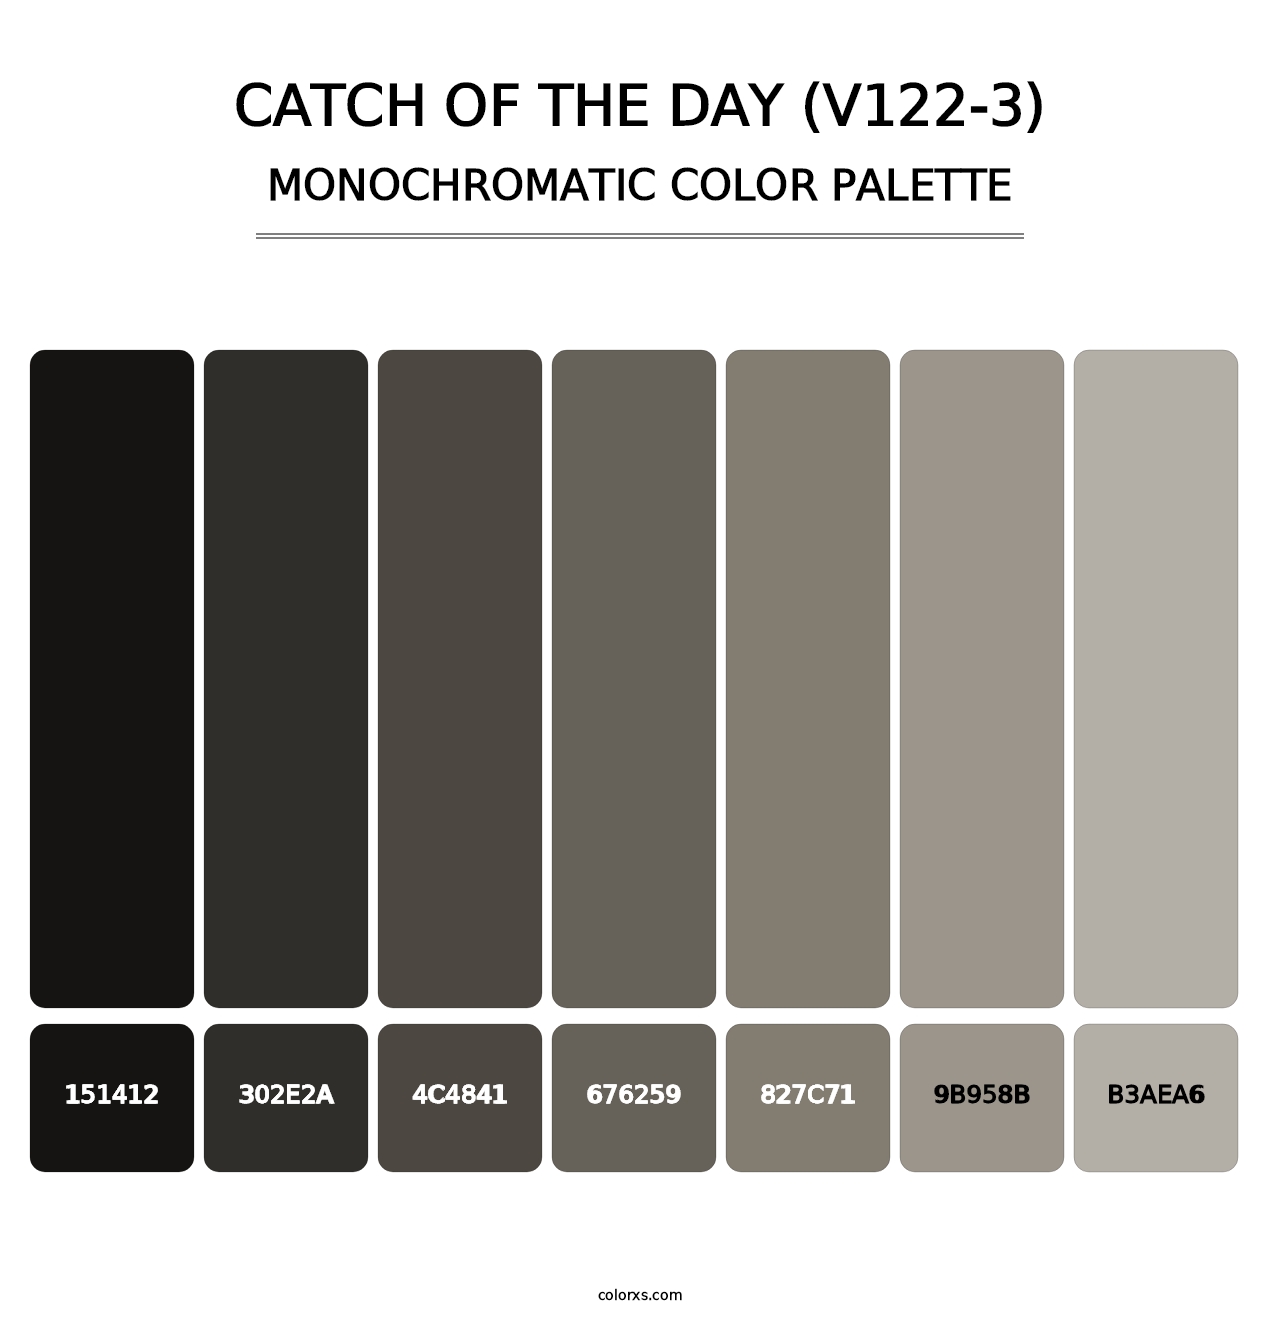 Catch of the Day (V122-3) - Monochromatic Color Palette